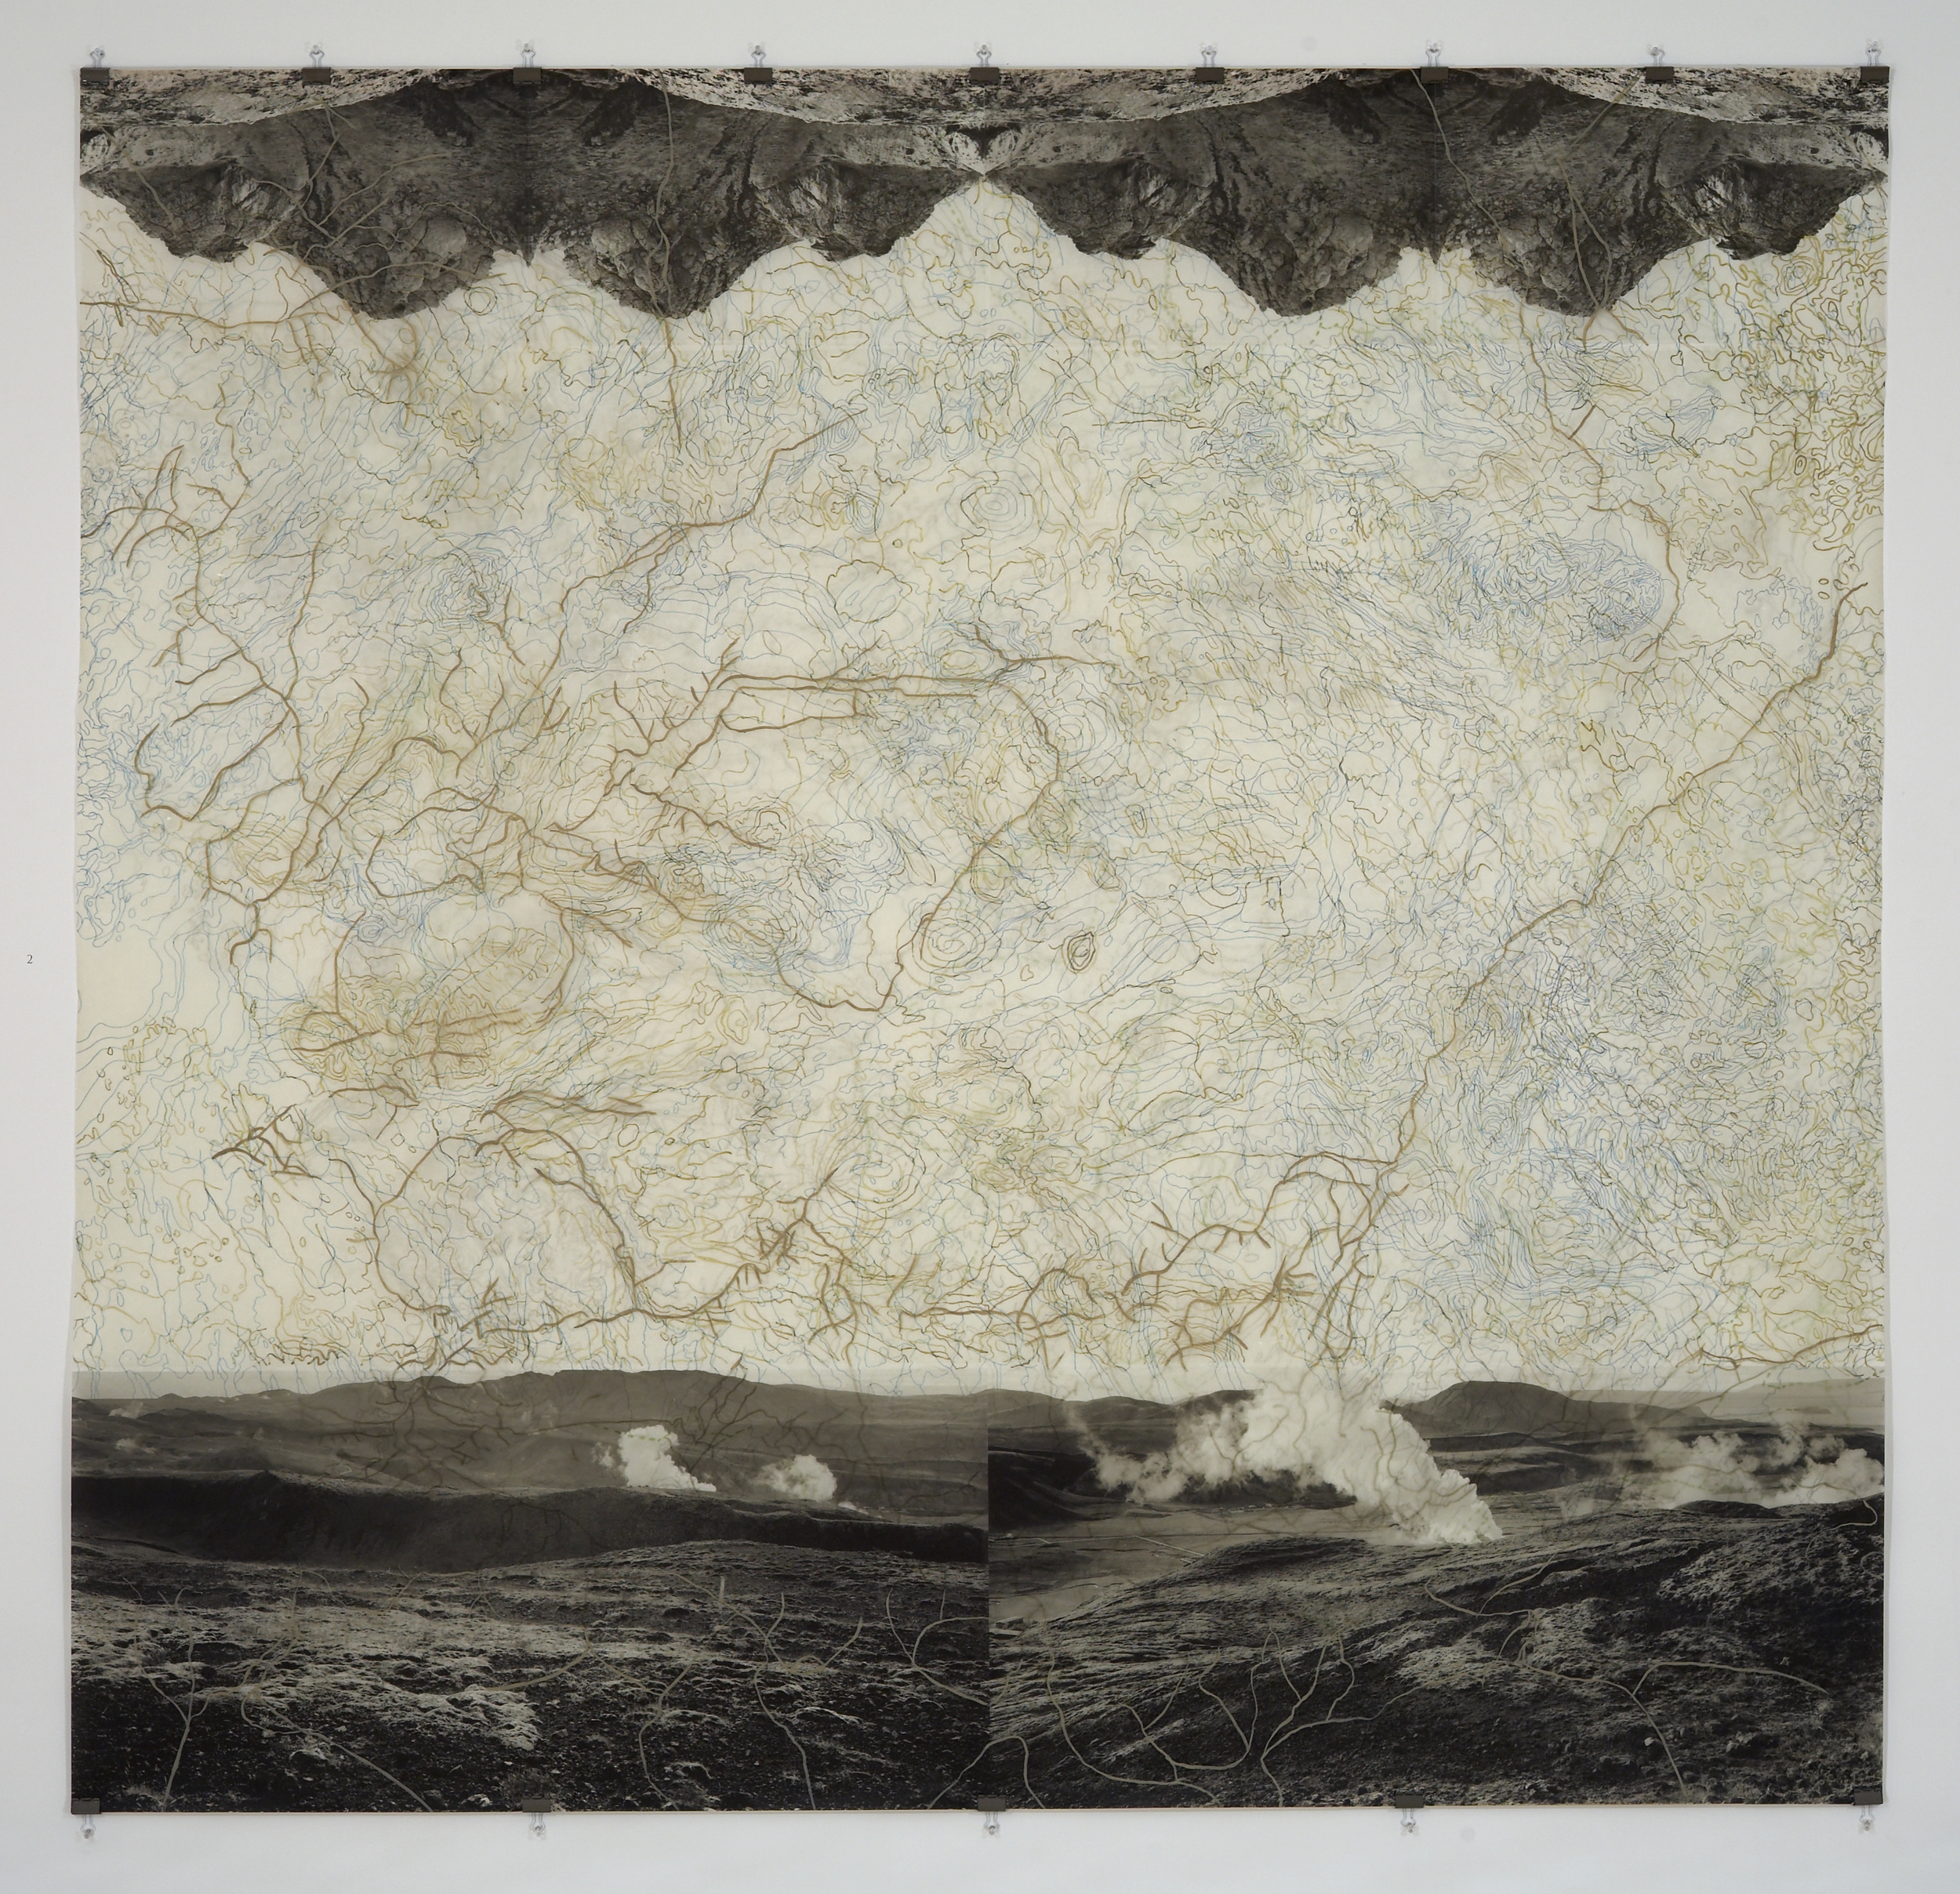    Geothermal Topography&nbsp;II, &nbsp;2007   Photogravure on kozo shi, digital pigment print, oil paint and wax in layers   79.5” X 82.5"  